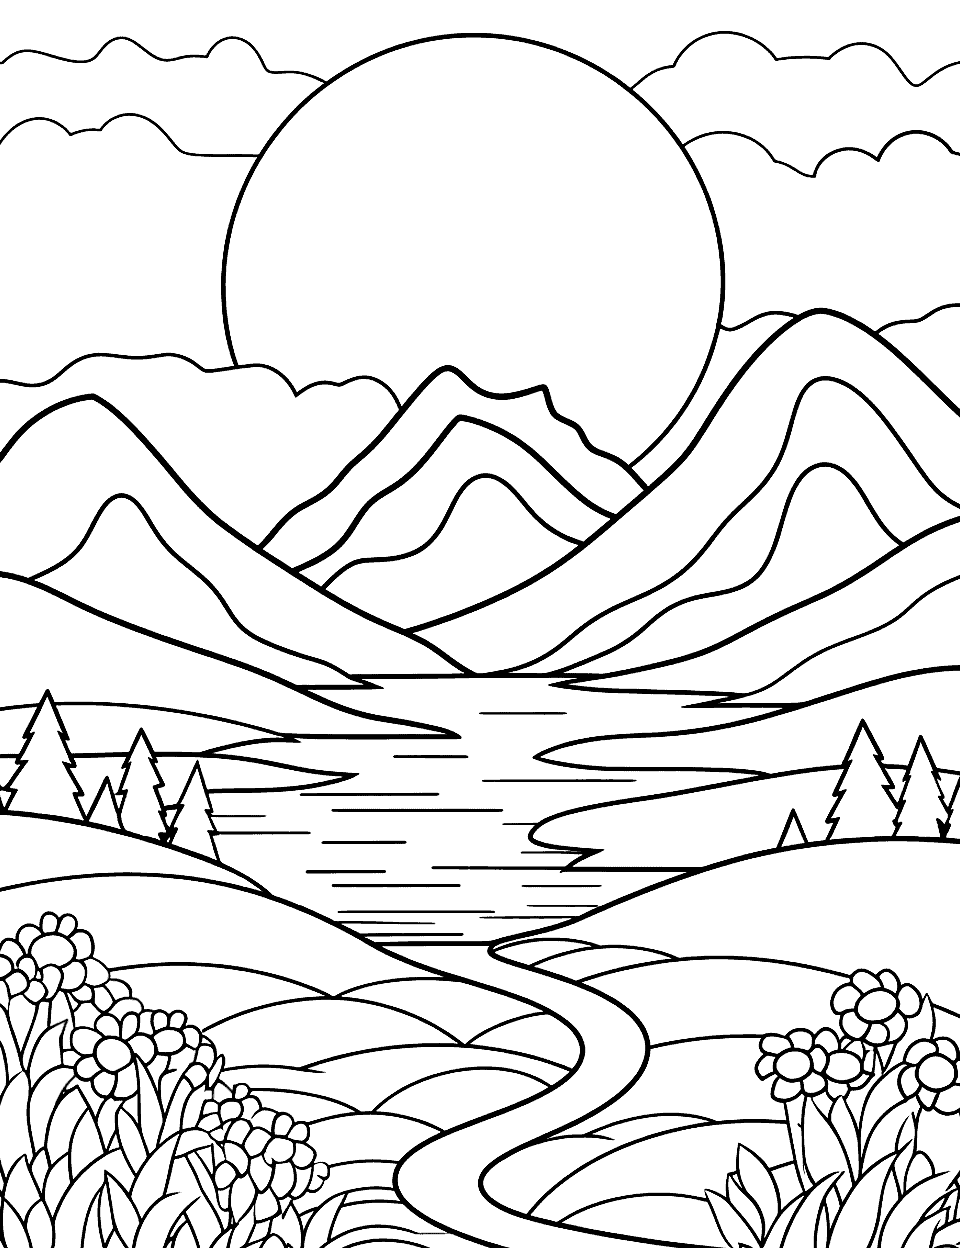 Majestic Mountain View Nature Coloring Page - A serene mountain landscape with a rising sun in the background.